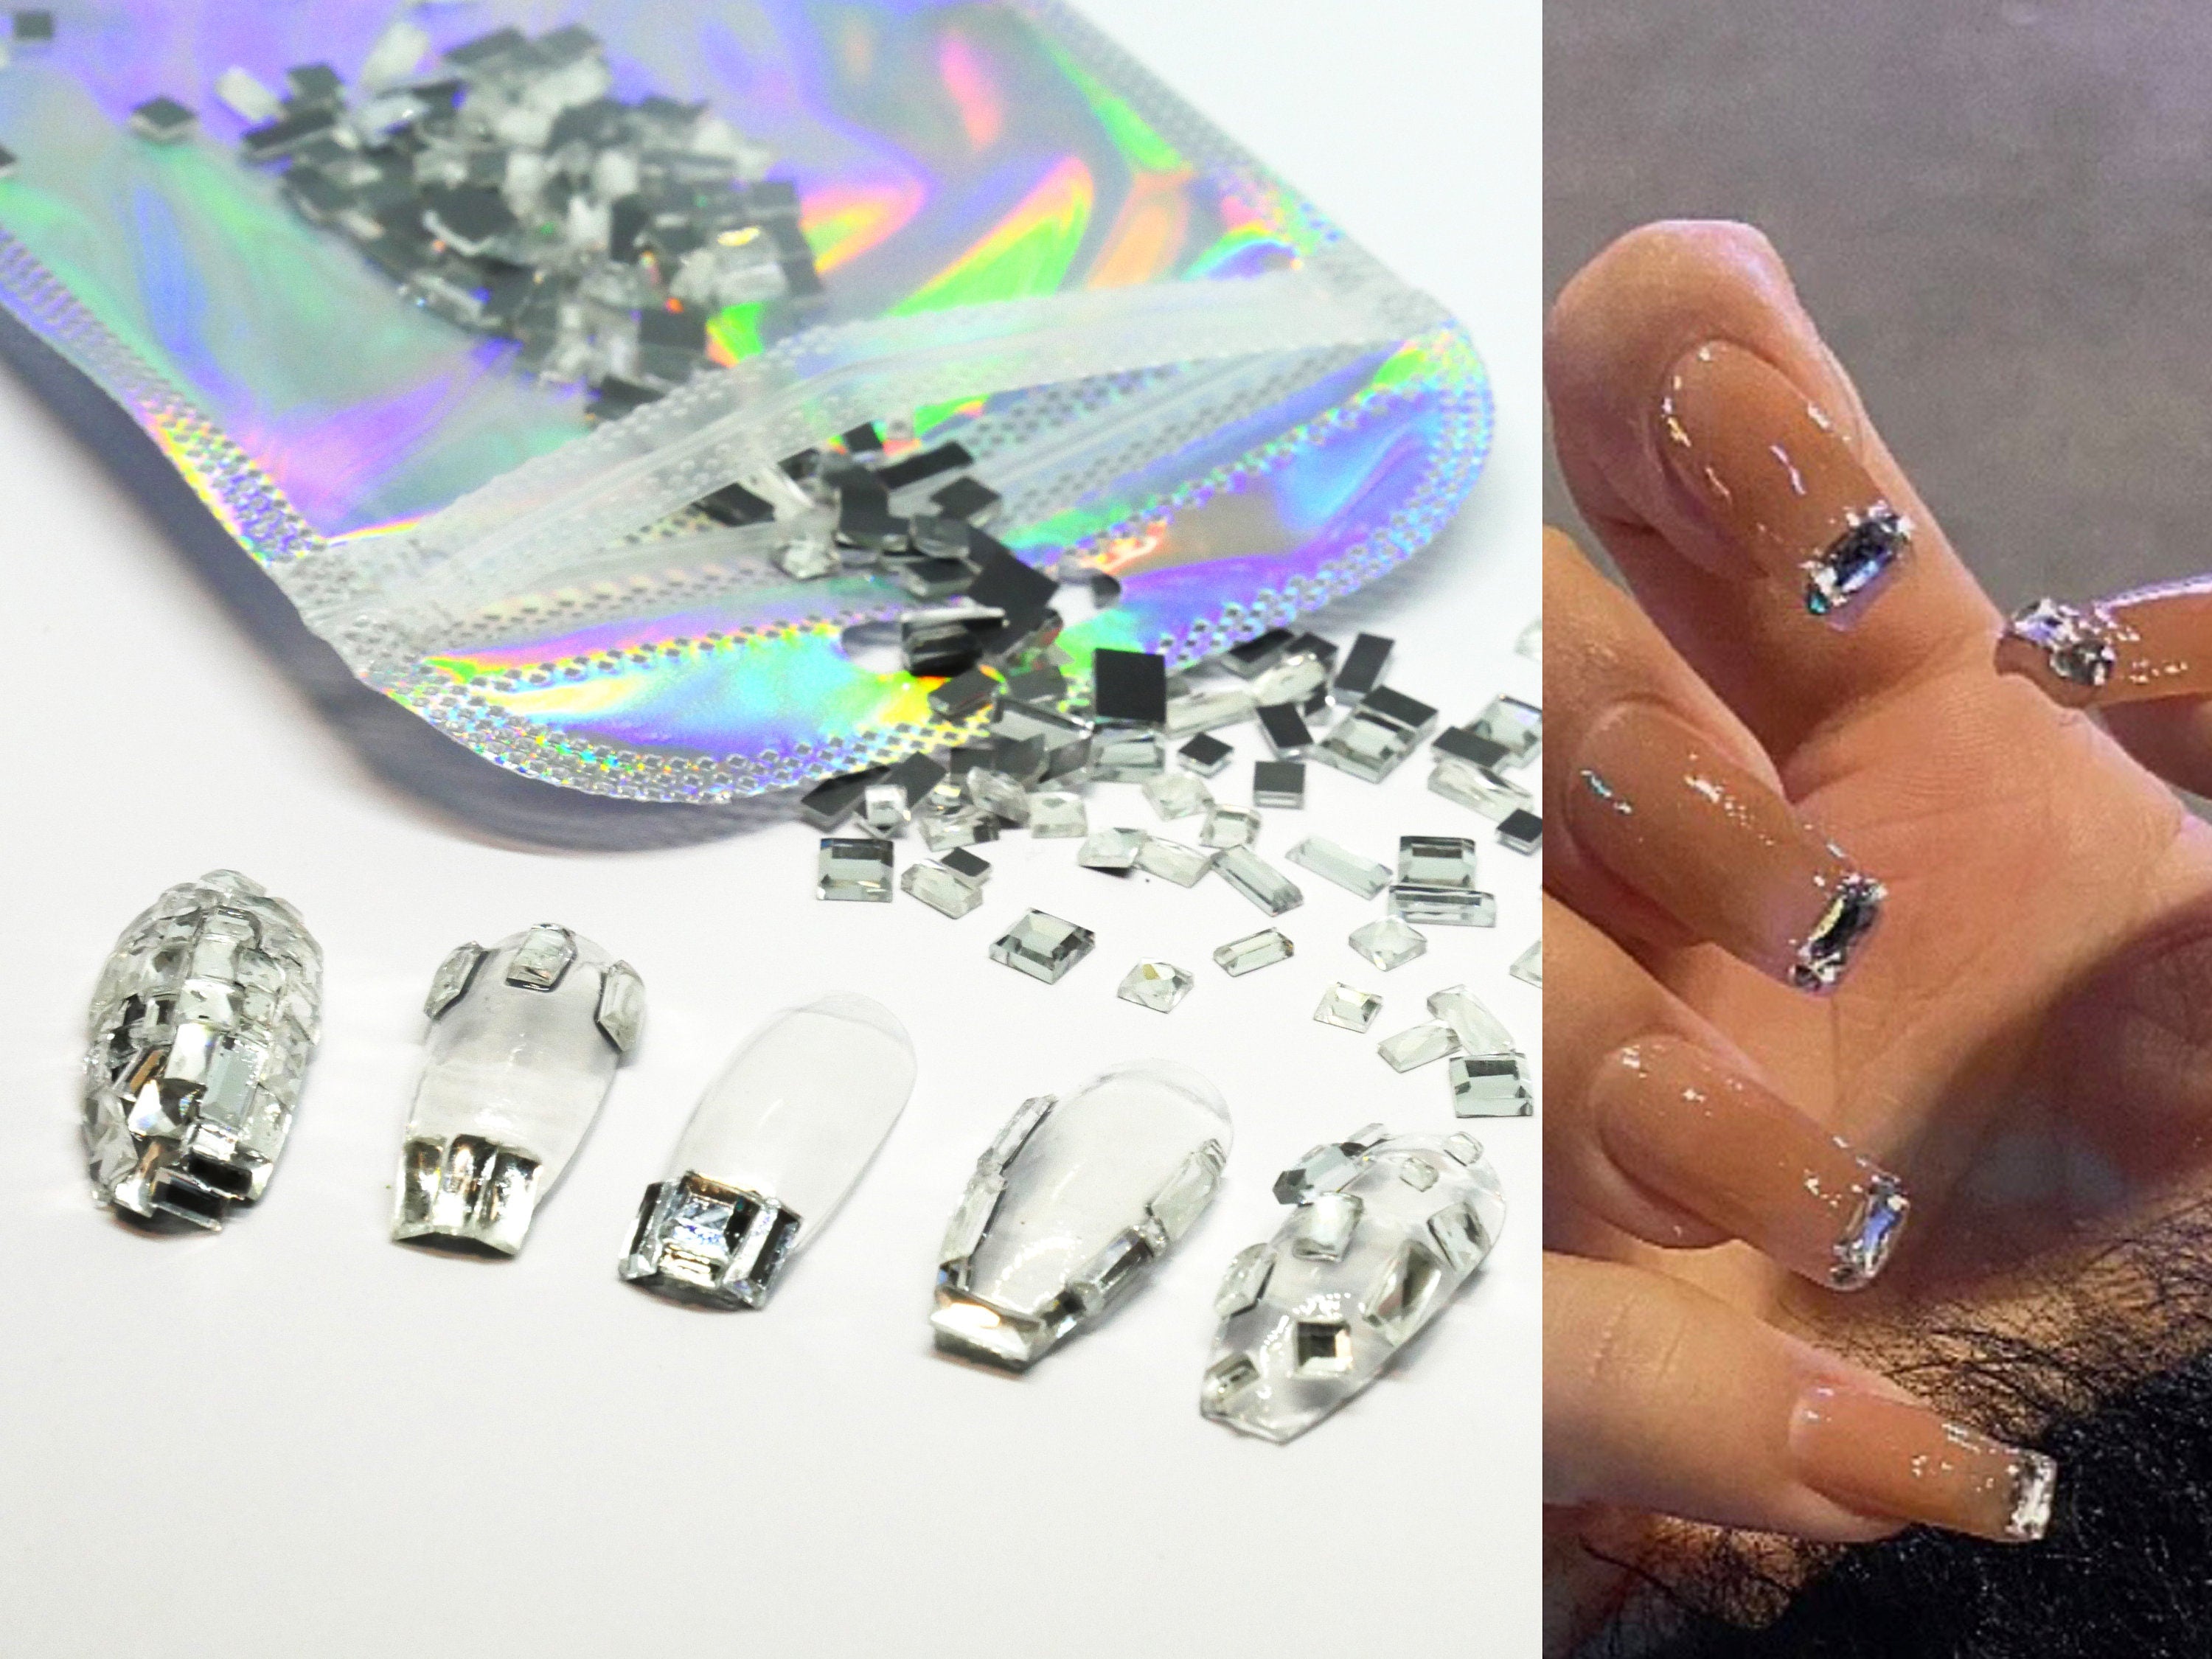 250 Pcs Clear Square Crystals/ Glass Nail Jewelry Diamond Set/ Flat Back  Crystals Nail Art Rhinestones/ Geometrical Nail Tip Decals - Etsy